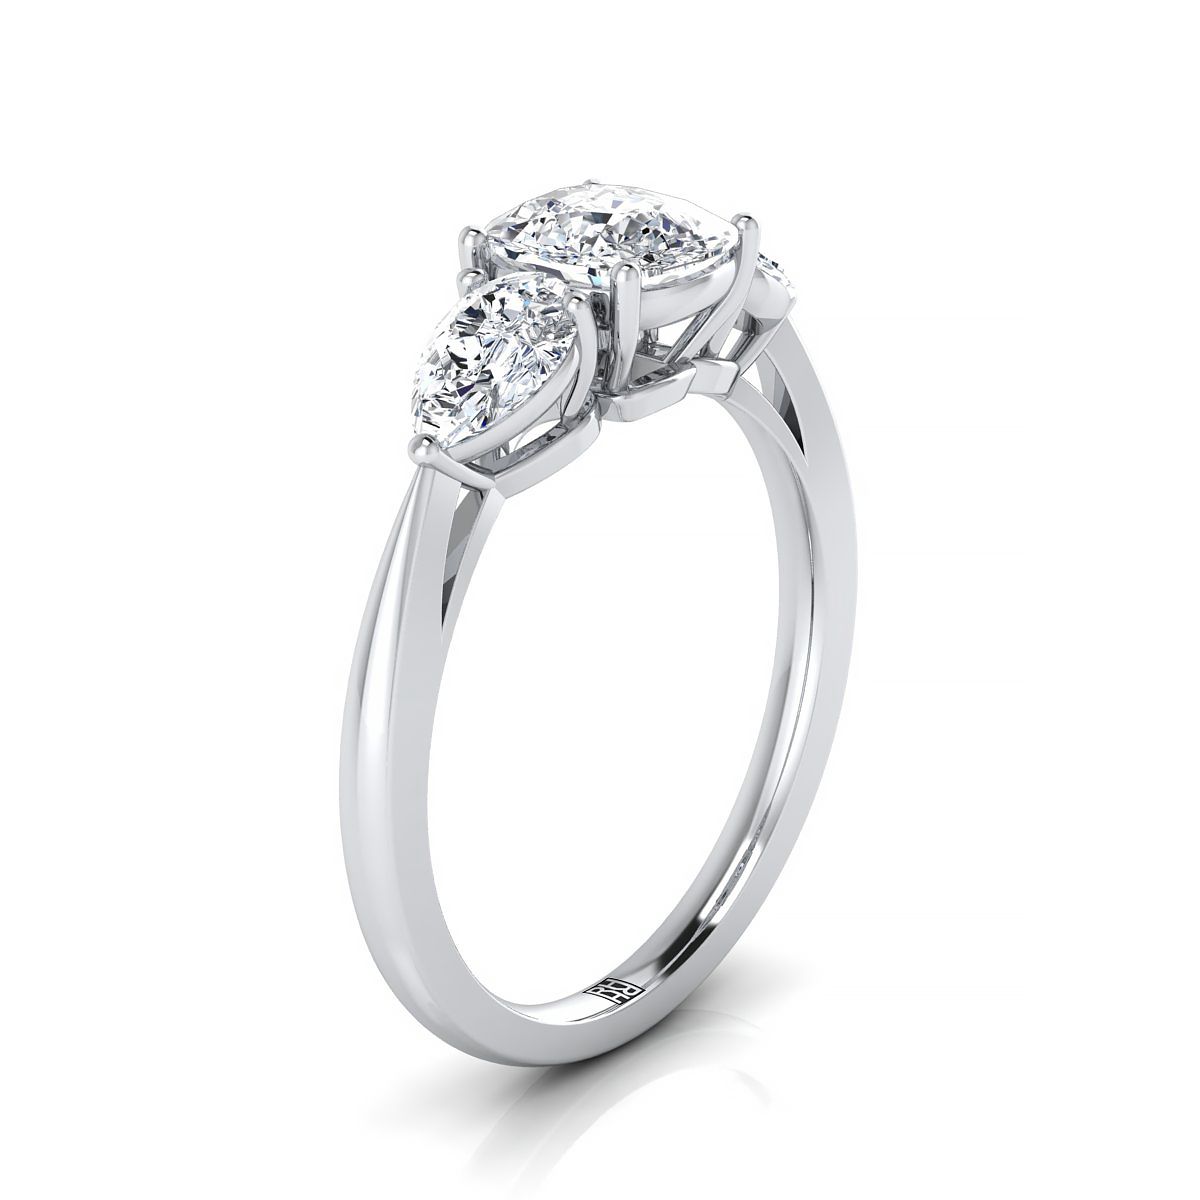 18K White Gold Cushion Diamond Perfectly Matched Pear Shaped Three Diamond Engagement Ring -7/8ctw